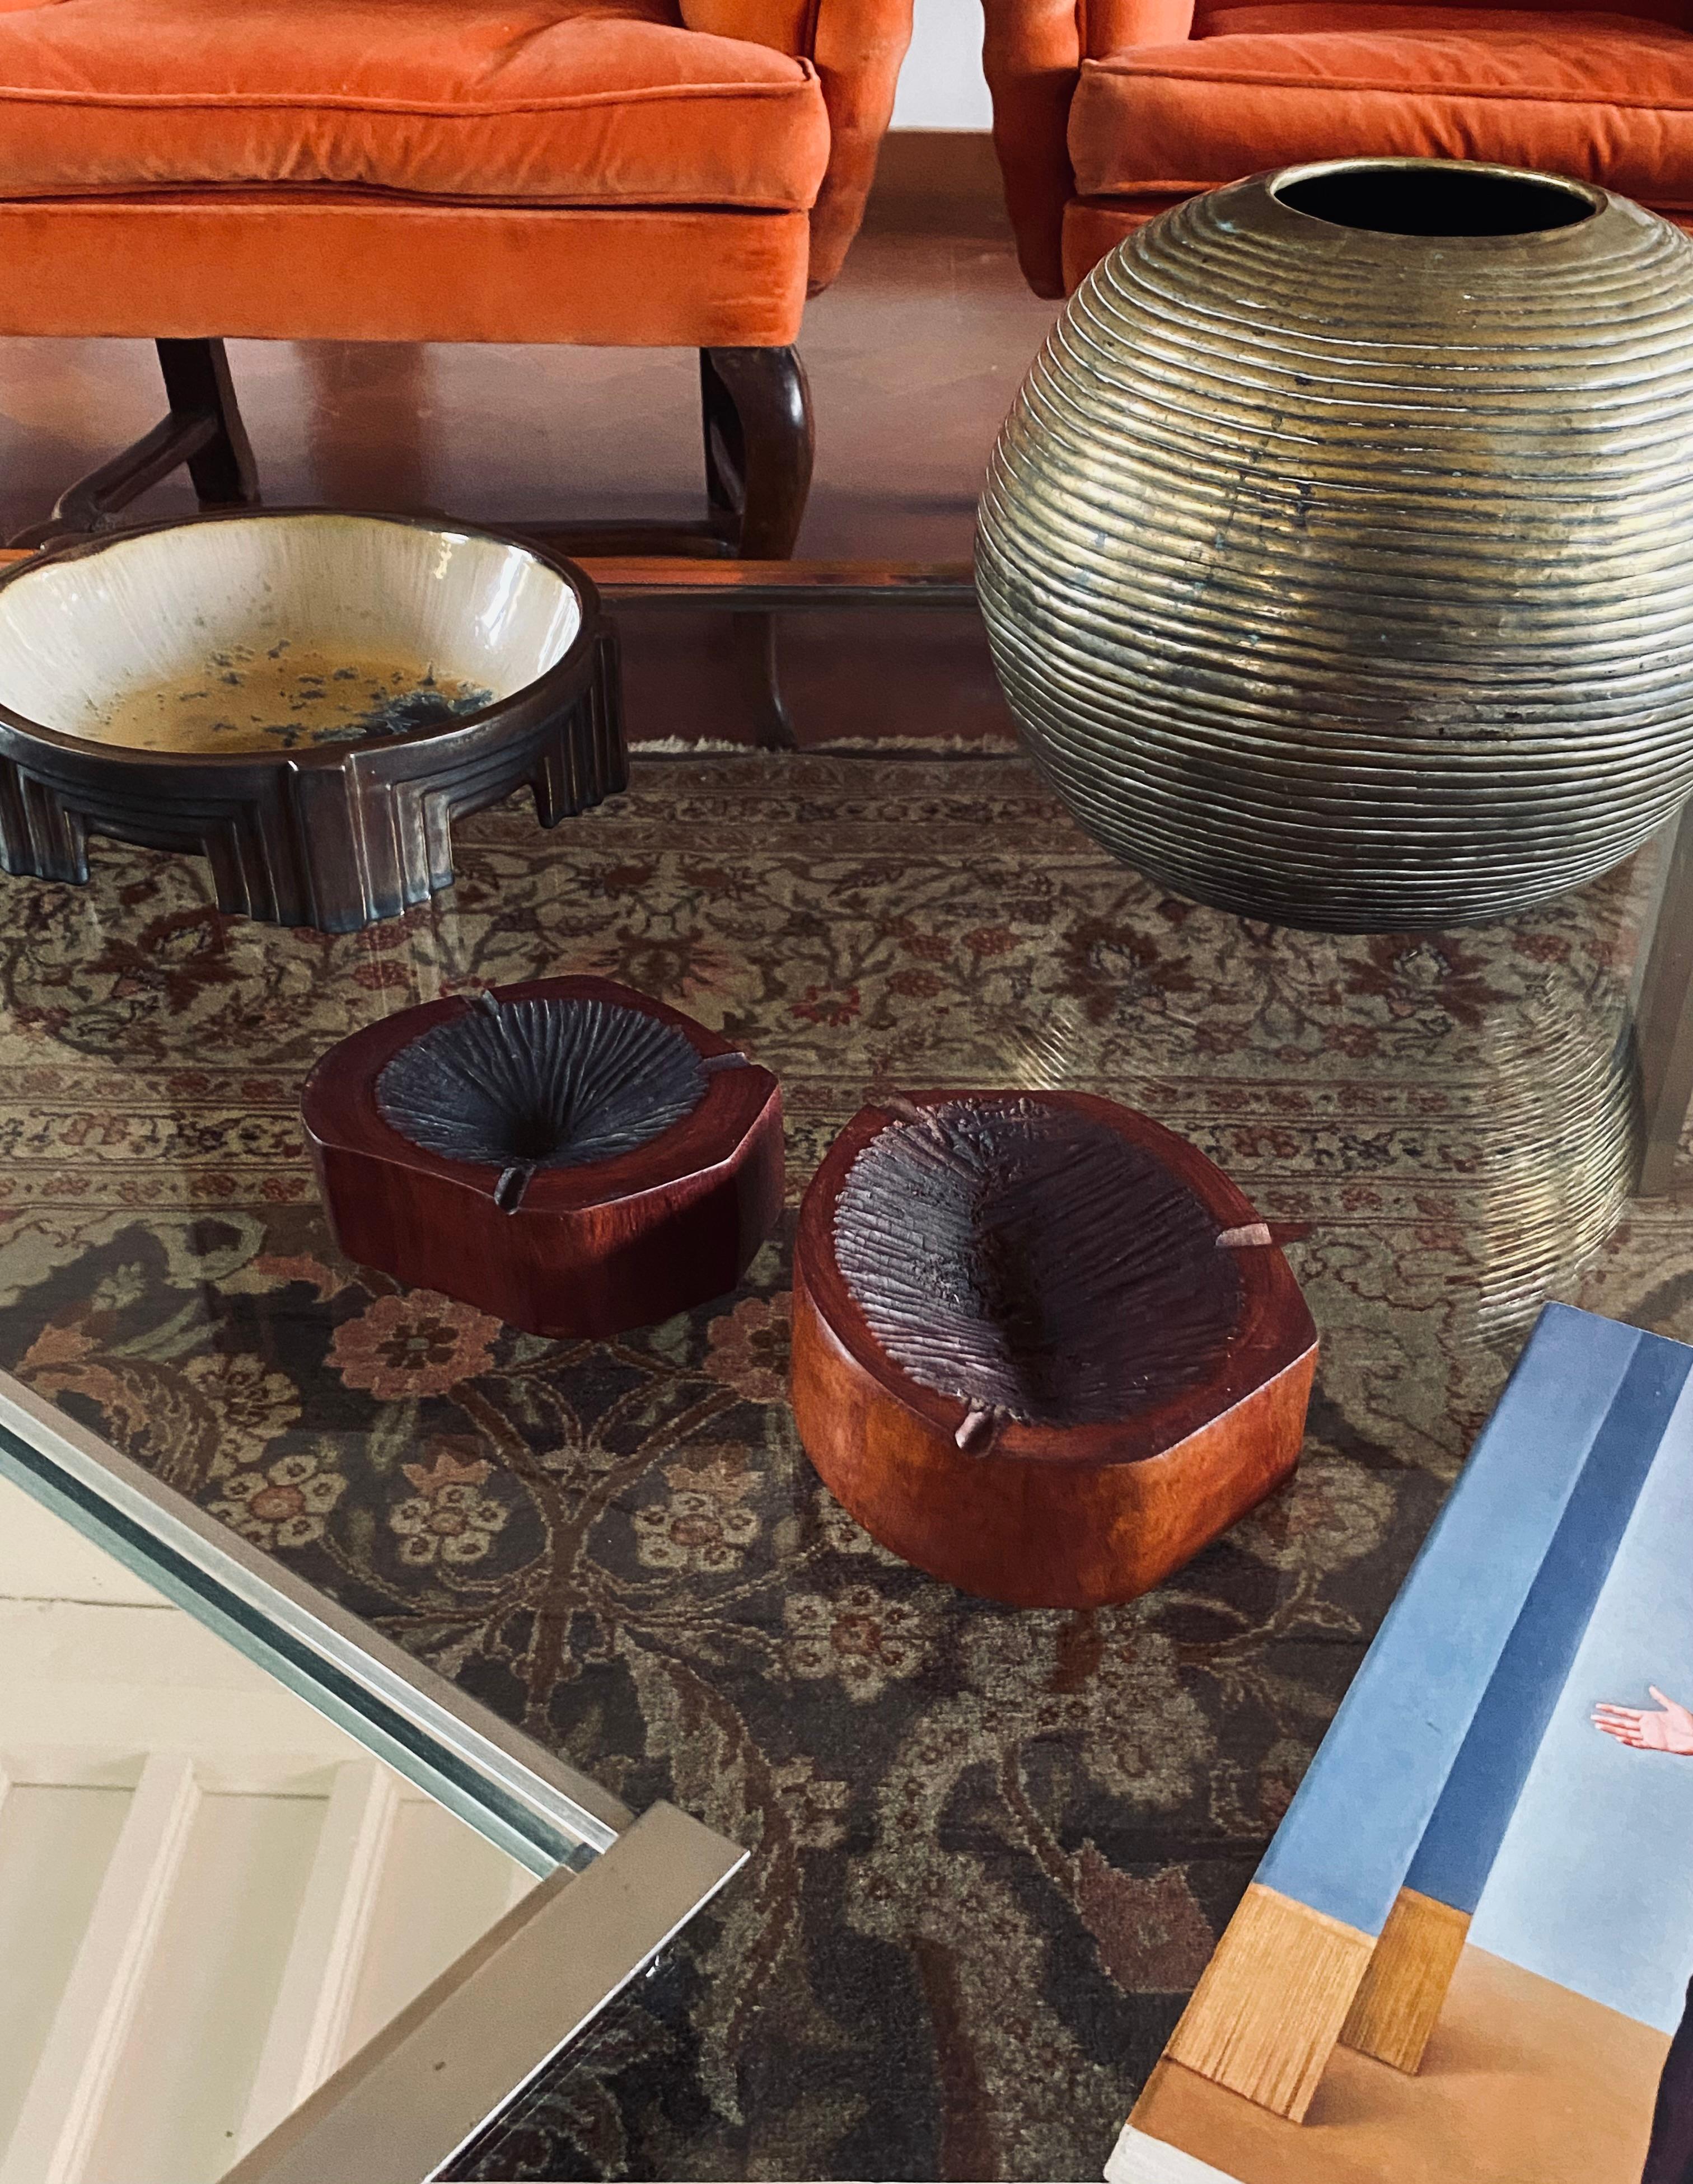 Organic modern set of 2 wood ashtrays,

France 1970s

in the manner of Monique Gerber

H: 5 cm 

Diam. 14 - 16.5 cm

Conditions: excellent consistent with age and use.